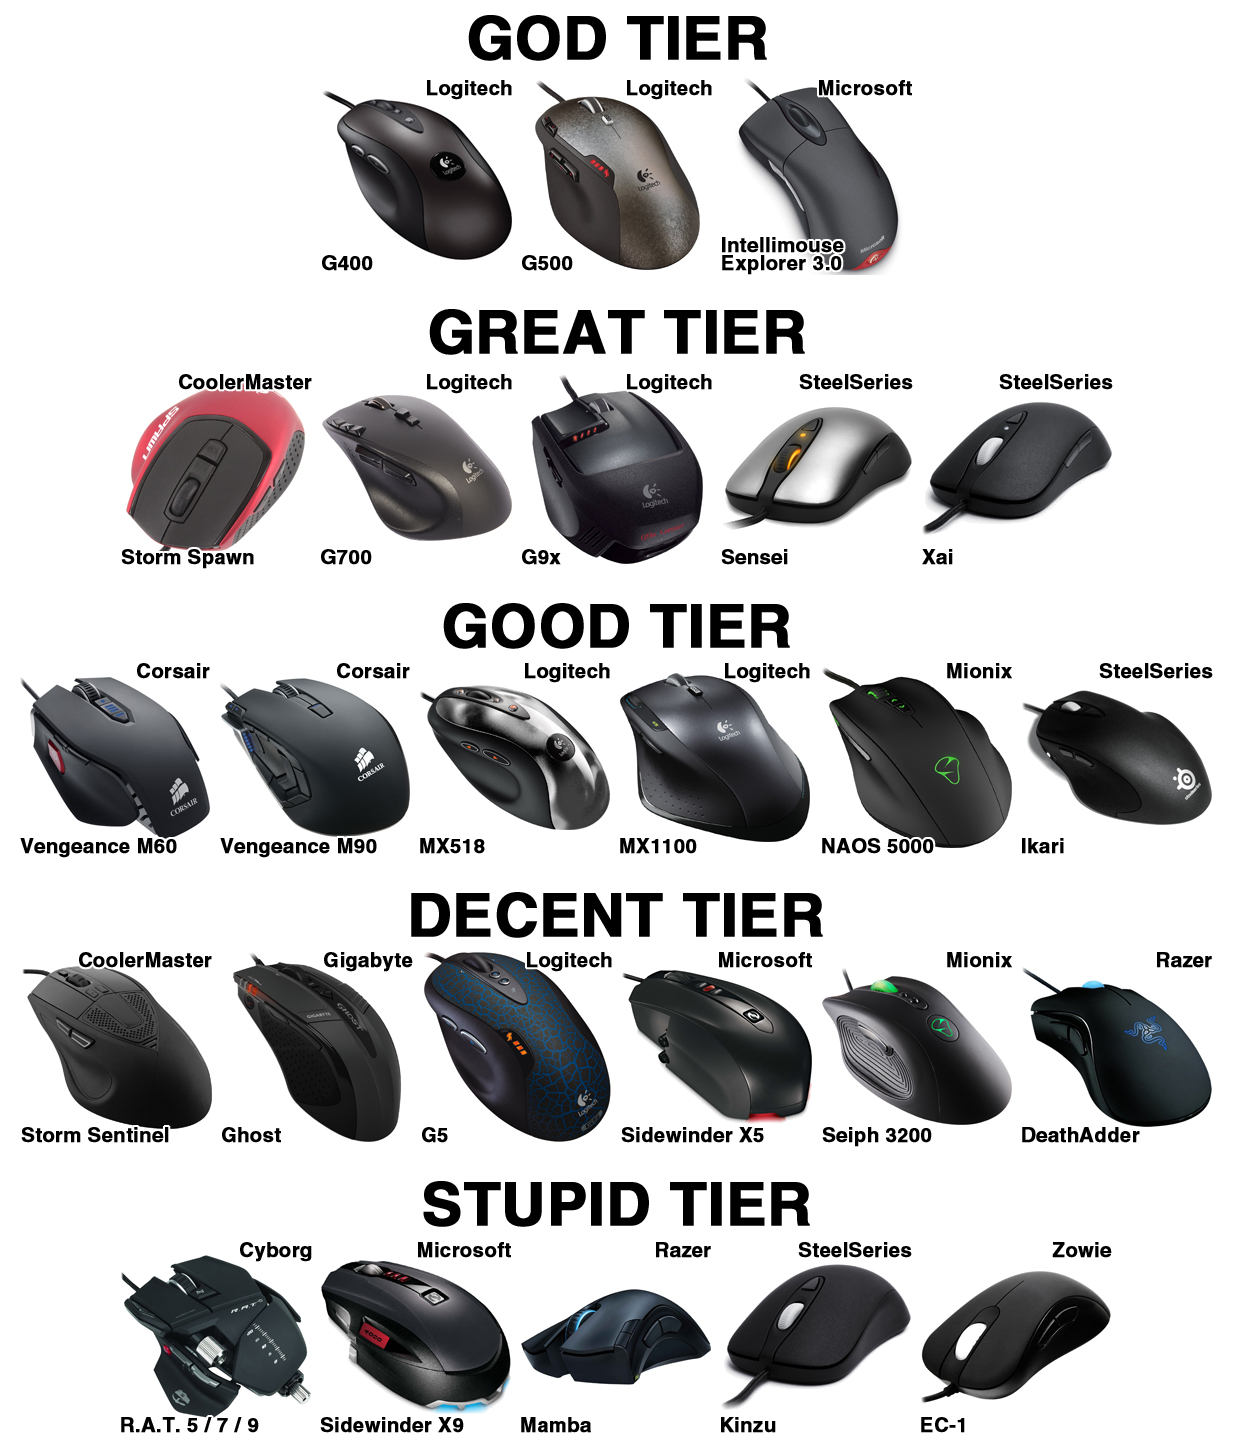 Mouse Chart